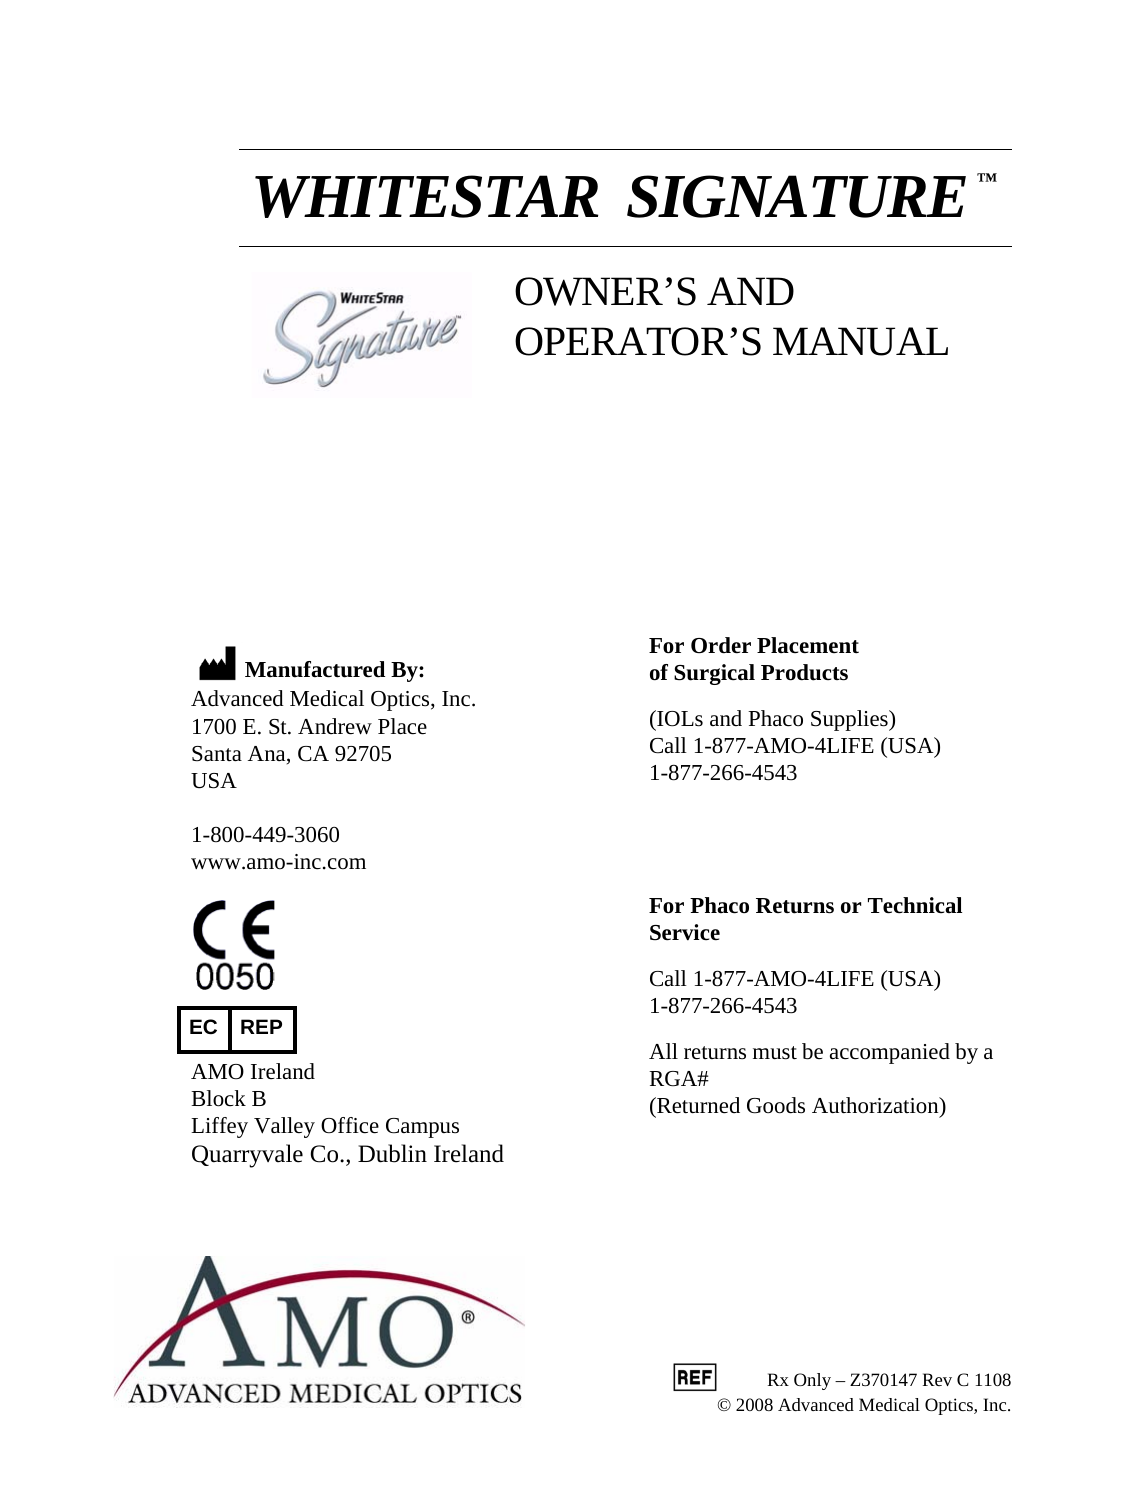 WHITESTAR  SIGNATURE™OWNER’S AND OPERATOR’S MANUALManufactured By:Advanced Medical Optics, Inc.1700 E. St. Andrew PlaceSanta Ana, CA 92705USA1-800-449-3060www.amo-inc.comFor Order Placement of Surgical Products(IOLs and Phaco Supplies)Call 1-877-AMO-4LIFE (USA)1-877-266-4543For Phaco Returns or Technical ServiceCall 1-877-AMO-4LIFE (USA)1-877-266-4543All returns must be accompanied by a RGA#(Returned Goods Authorization)EC REPAMO IrelandBlock B Liffey Valley Office CampusQuarryvale Co., Dublin Ireland          Rx Only – Z370147 Rev C 1108© 2008 Advanced Medical Optics, Inc. 